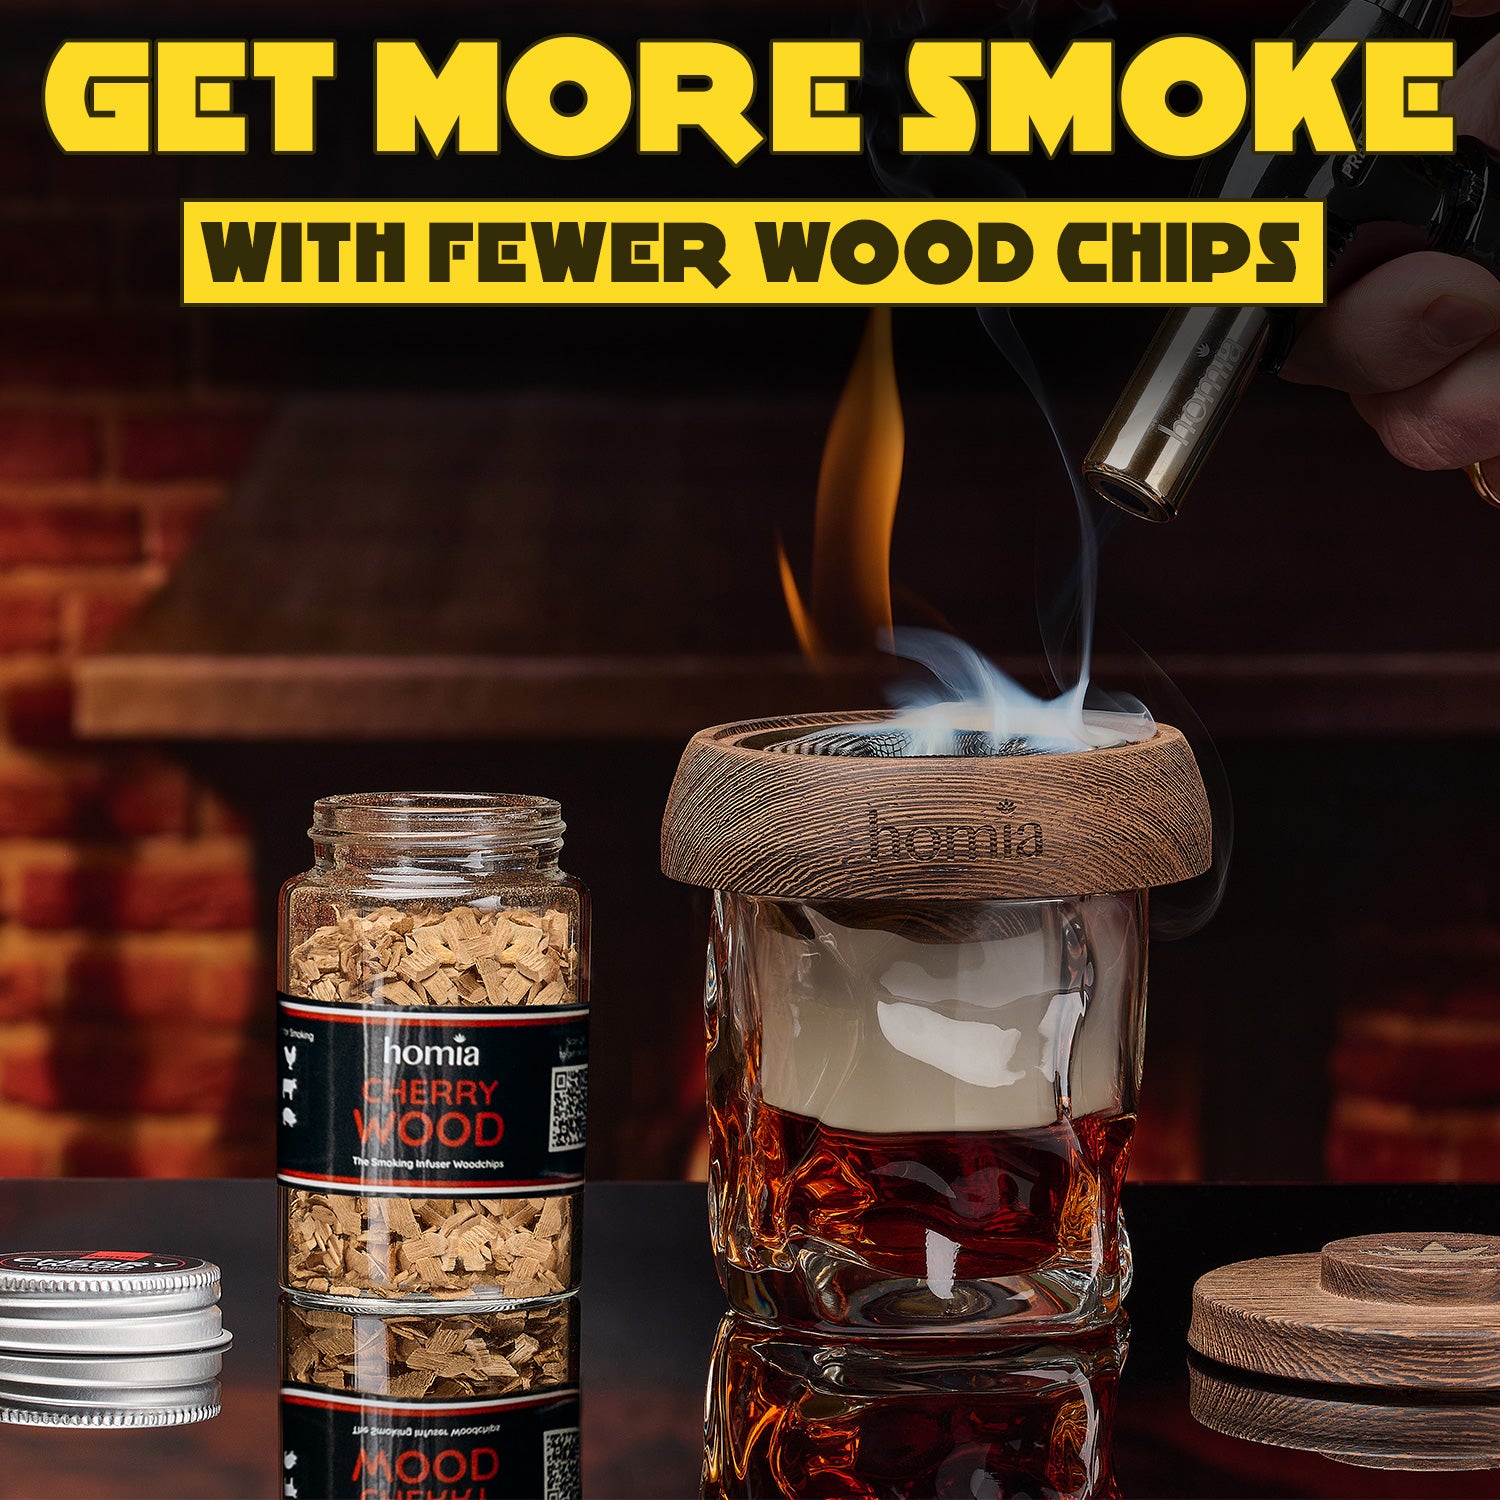 Wood Chips Set for Smoking Infuser